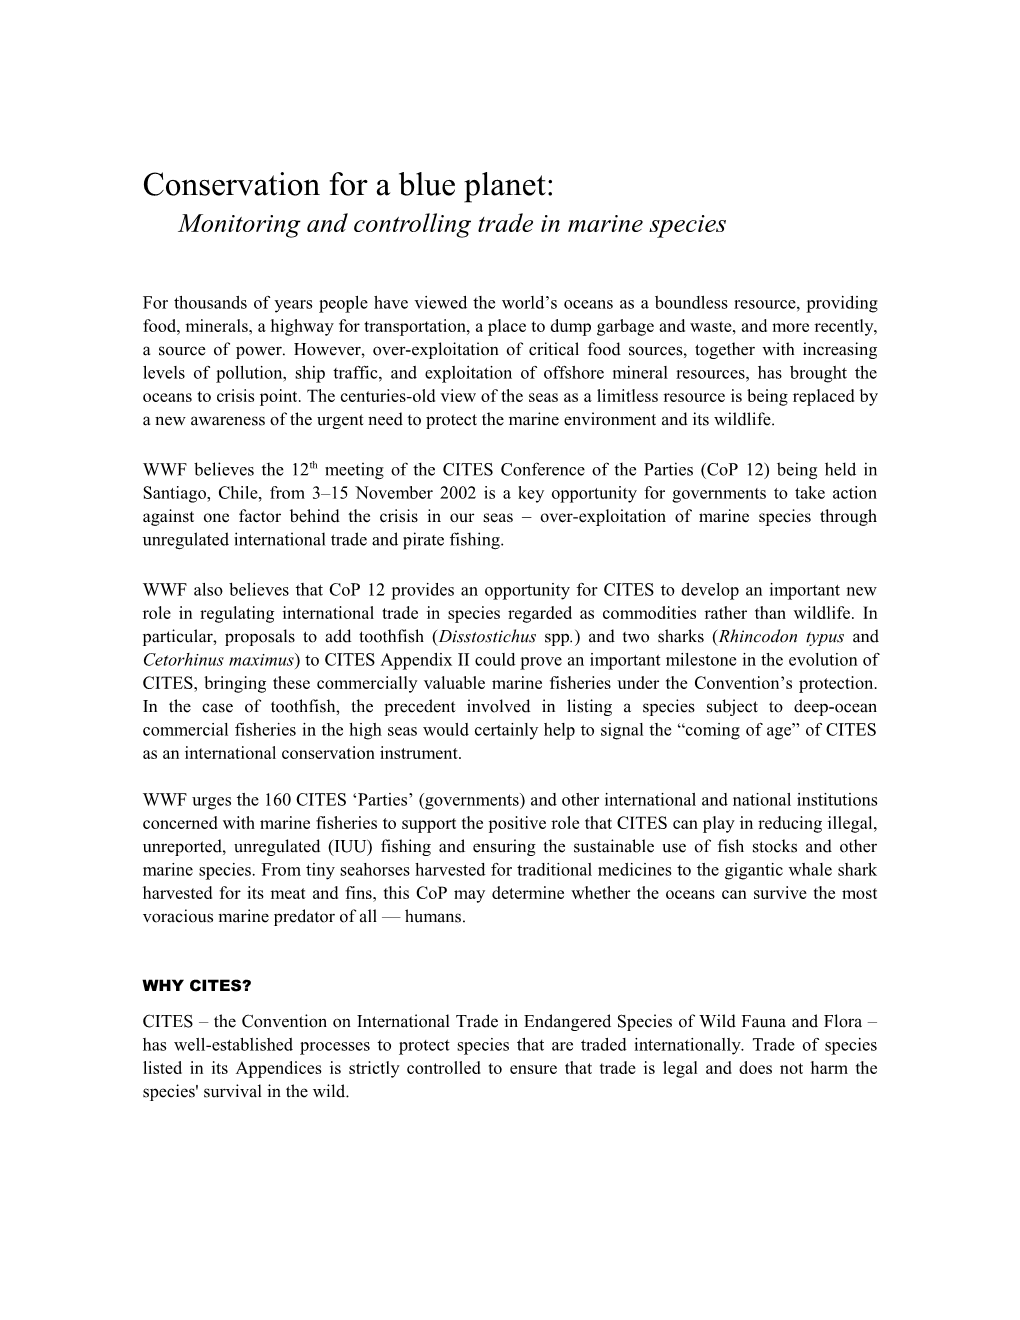 Conservation for a Blue Planet